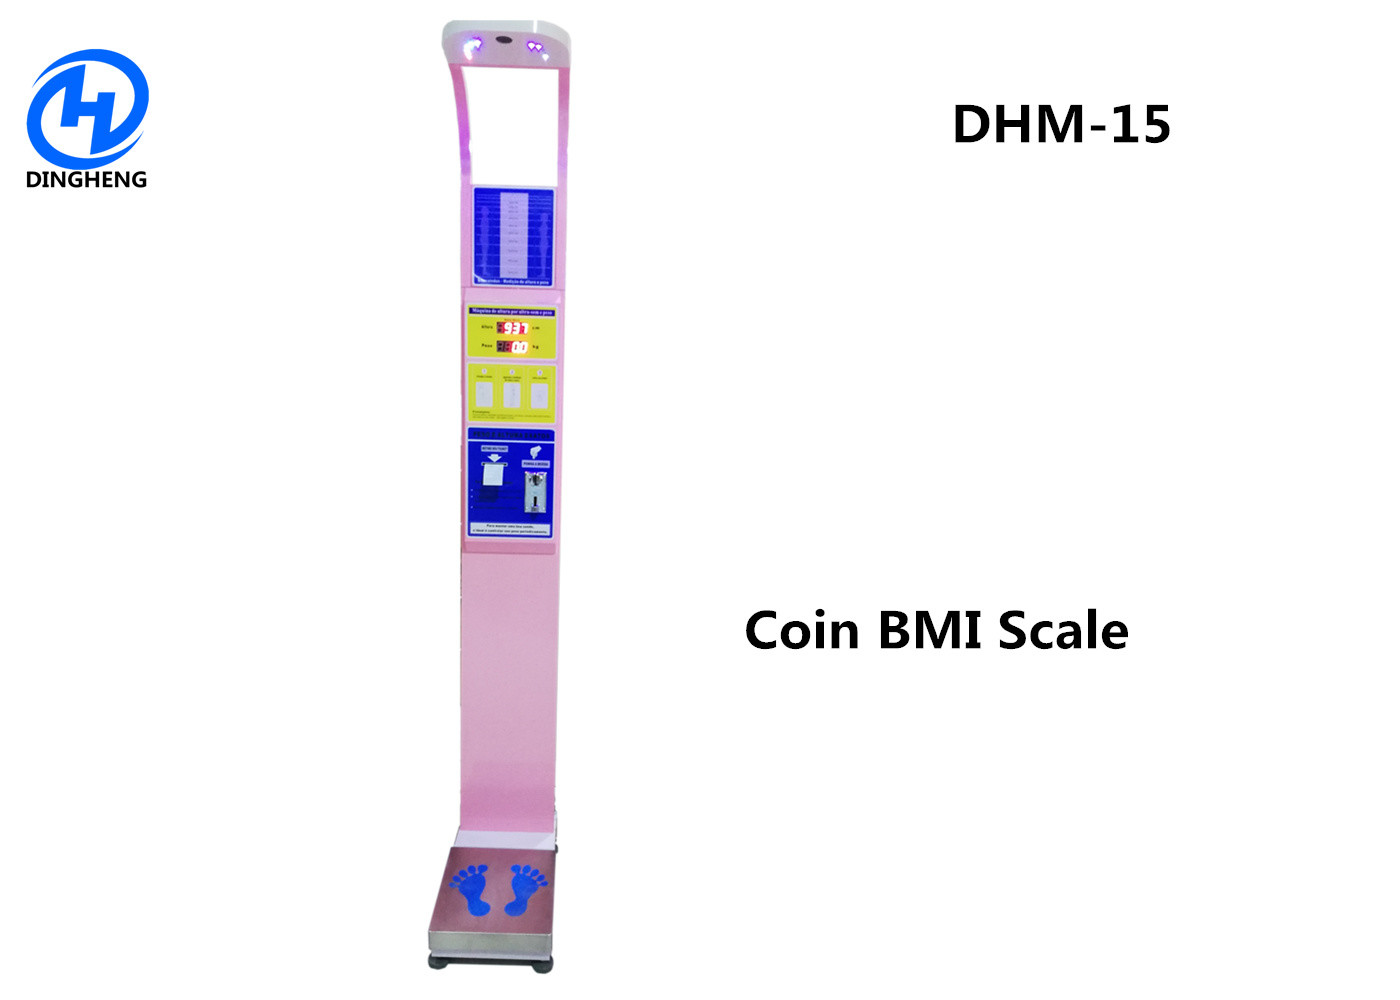 China Iron medical height and weight scales with BMI analysis and coin wholesale